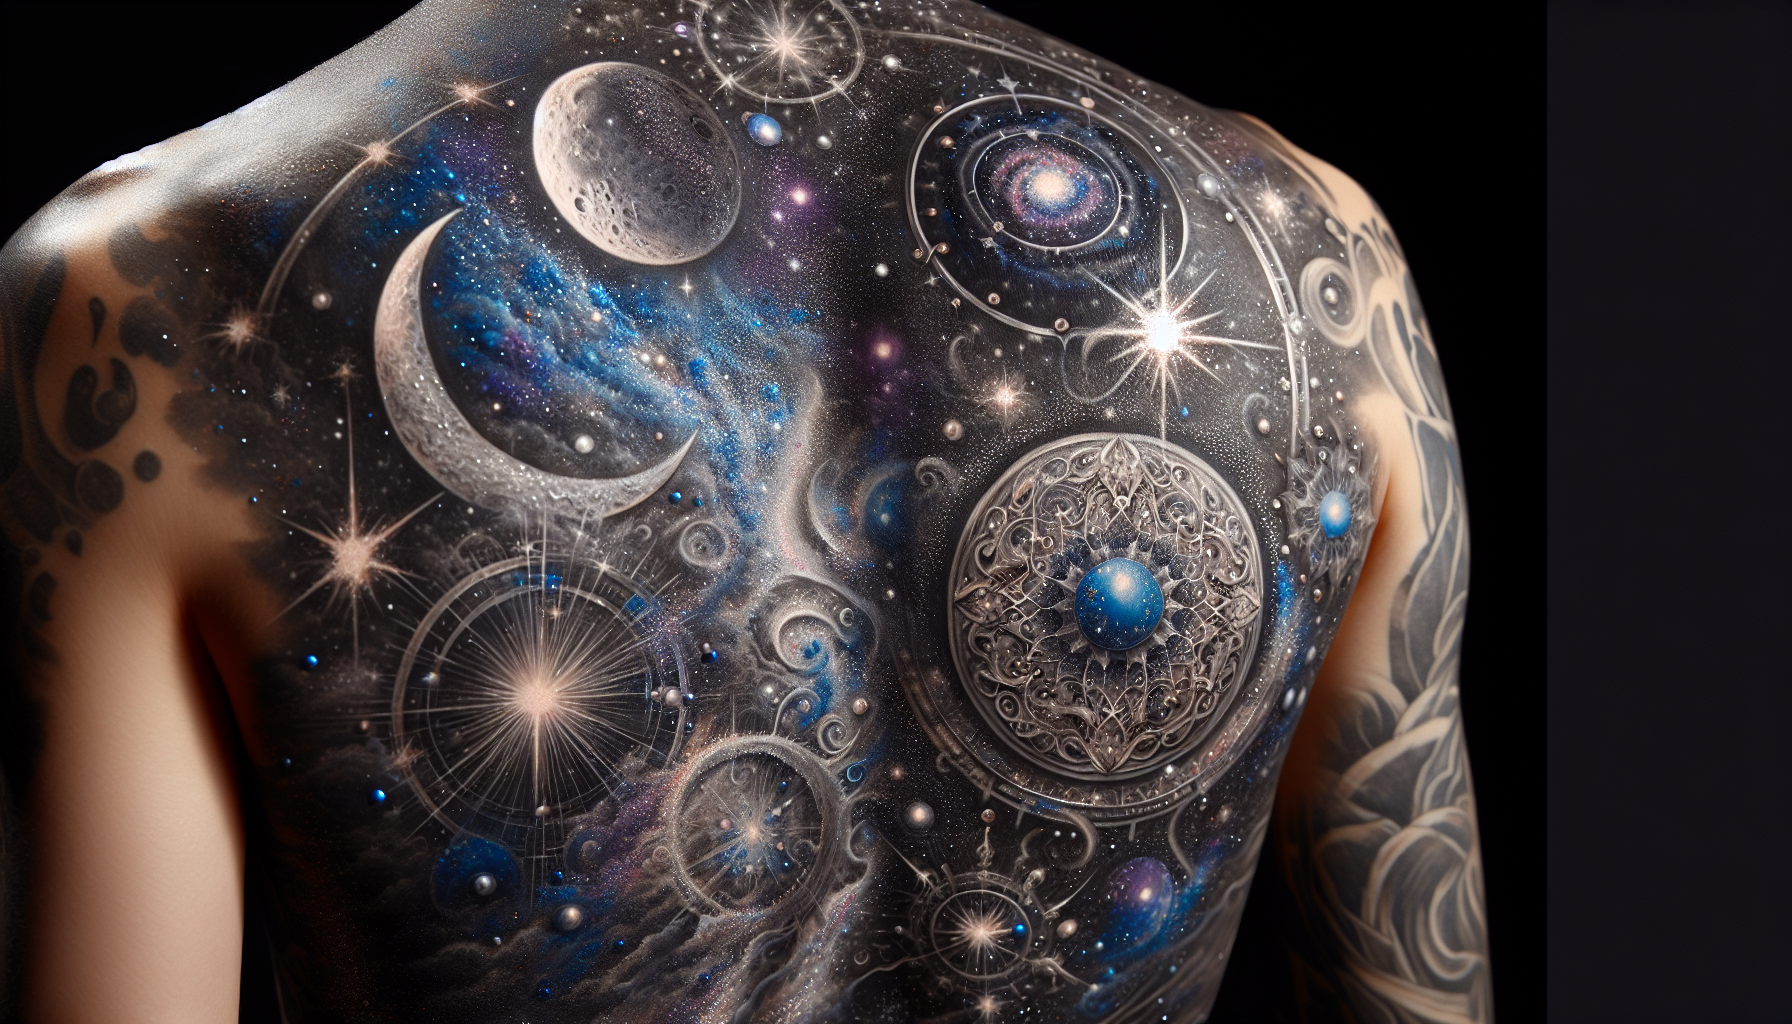 Celestial body tattoos featuring moons, stars, and solar systems